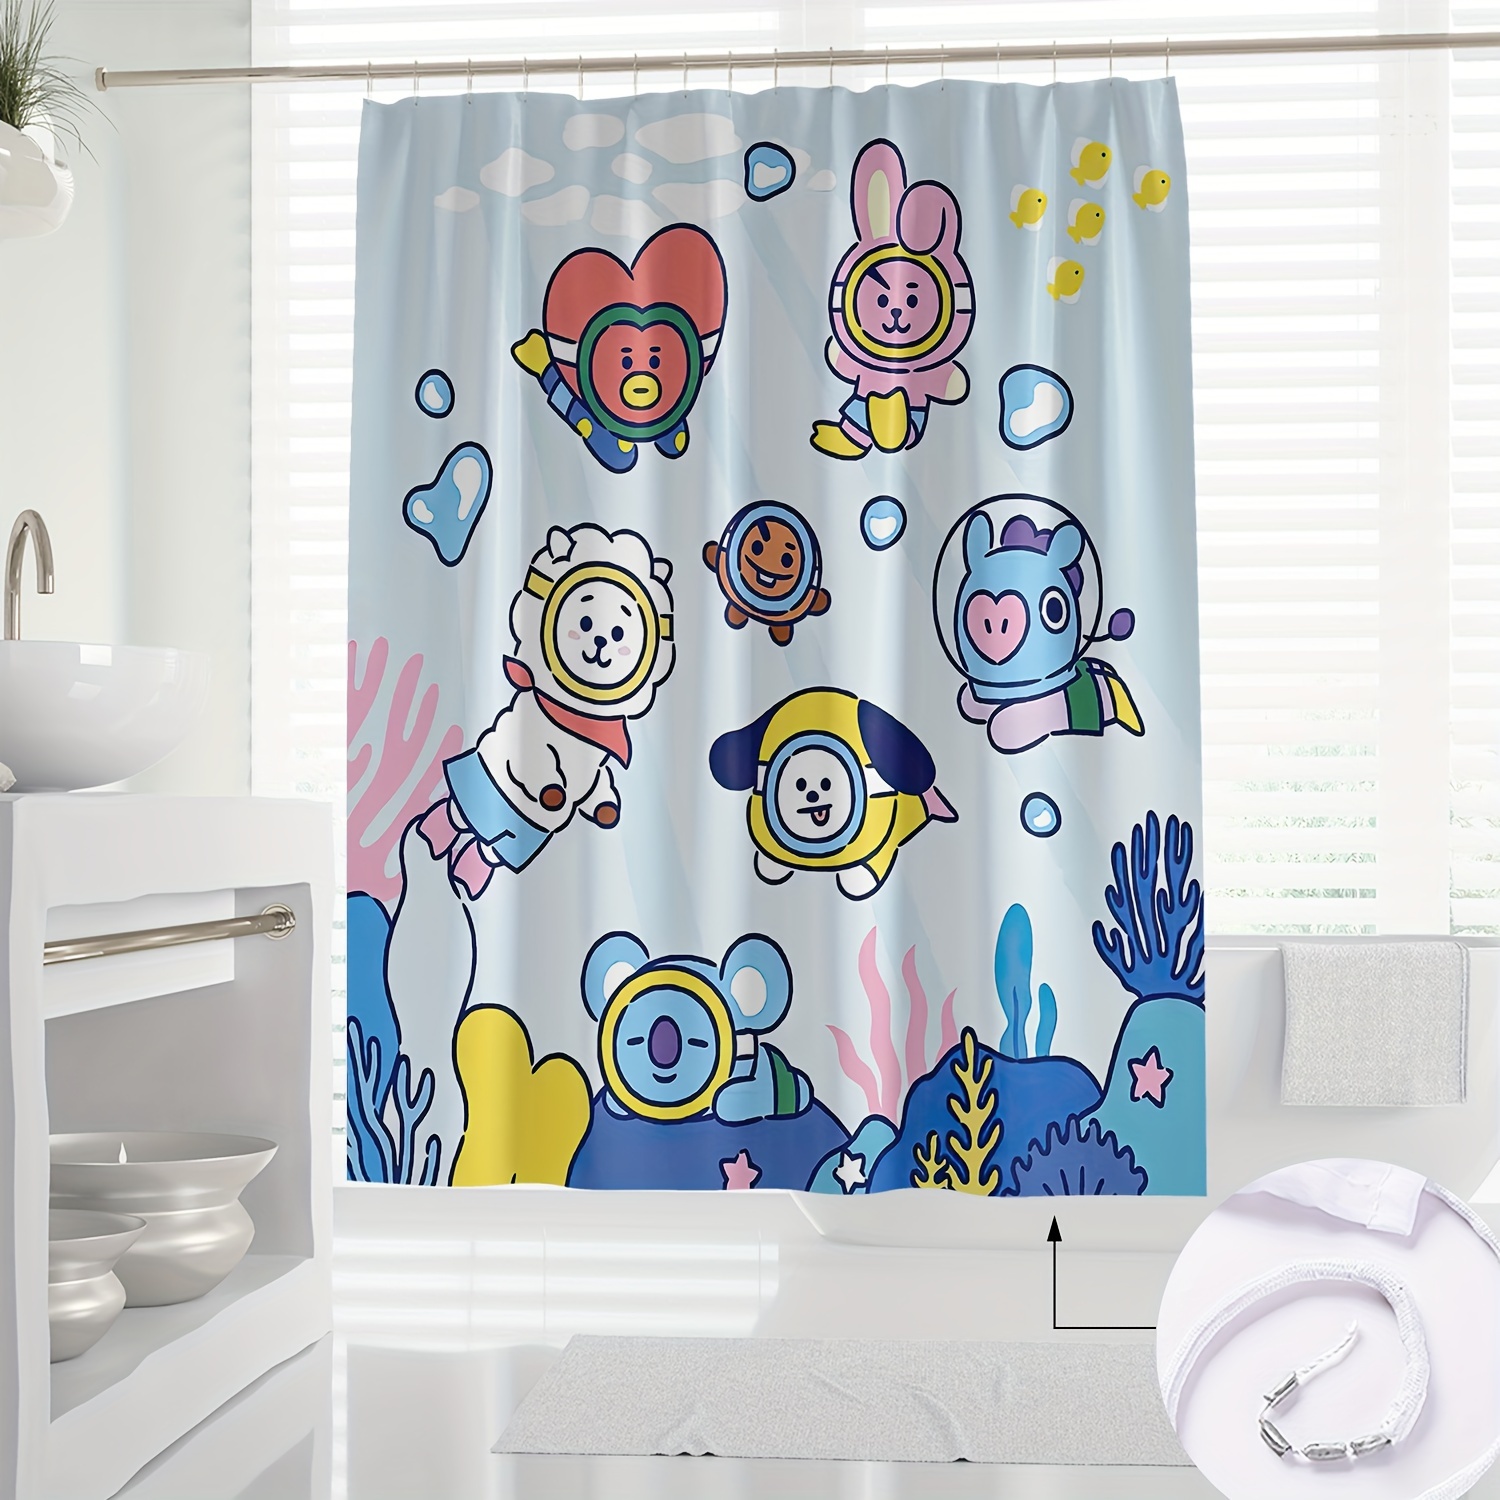 

K-pop Bts Cartoon Cute Popular Culture Fan Support Shower Curtain - Waterproof Polyester, Machine Washable With Hooks, Artistic Theme For All Seasons Bathroom Decor - 1pc